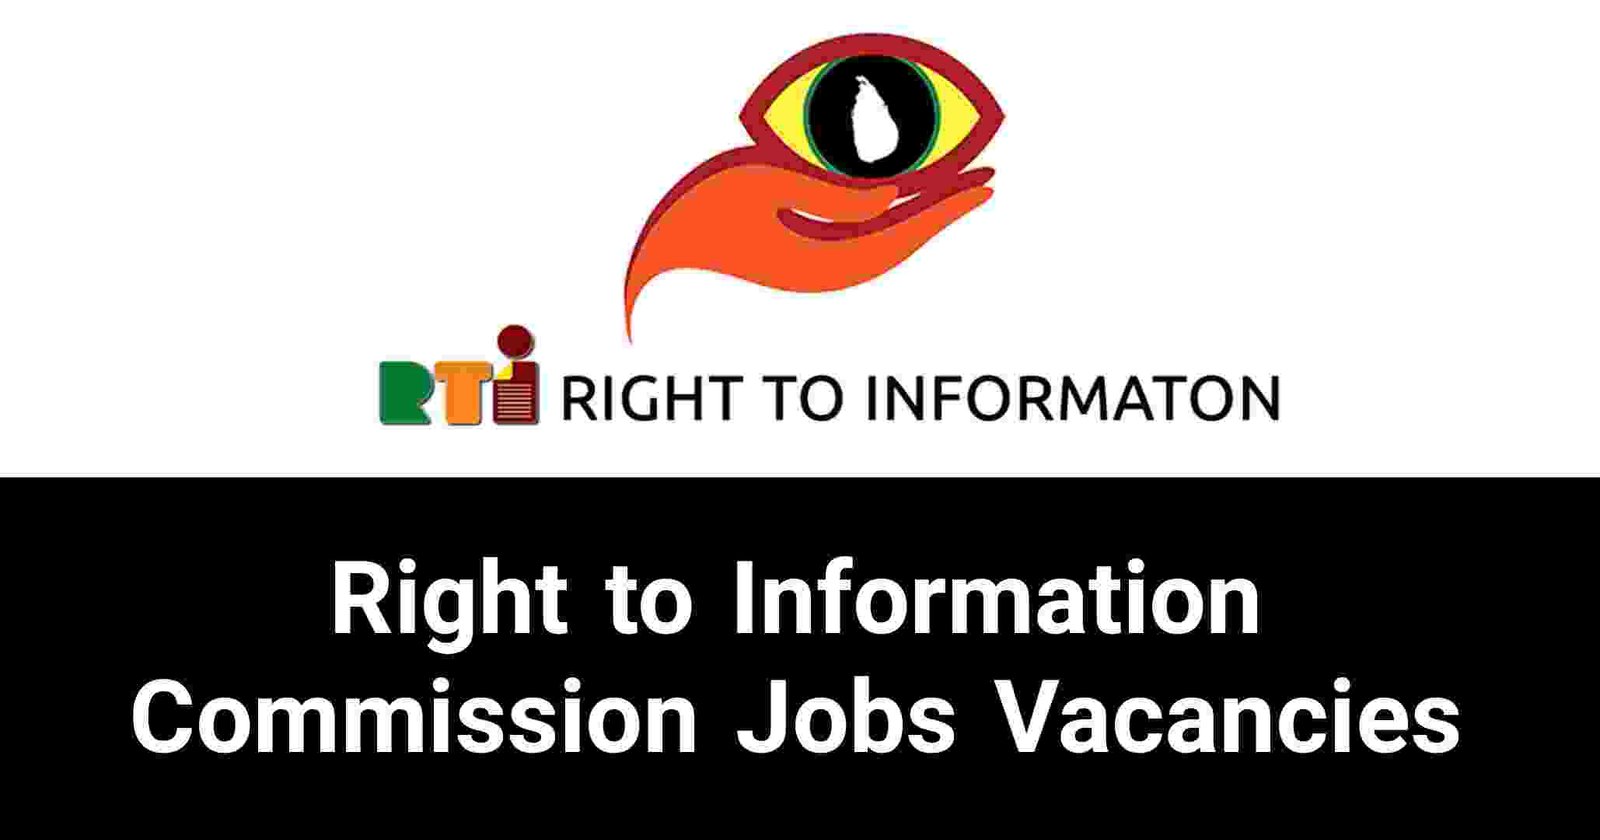 Right to Information Commission Jobs Vacancies